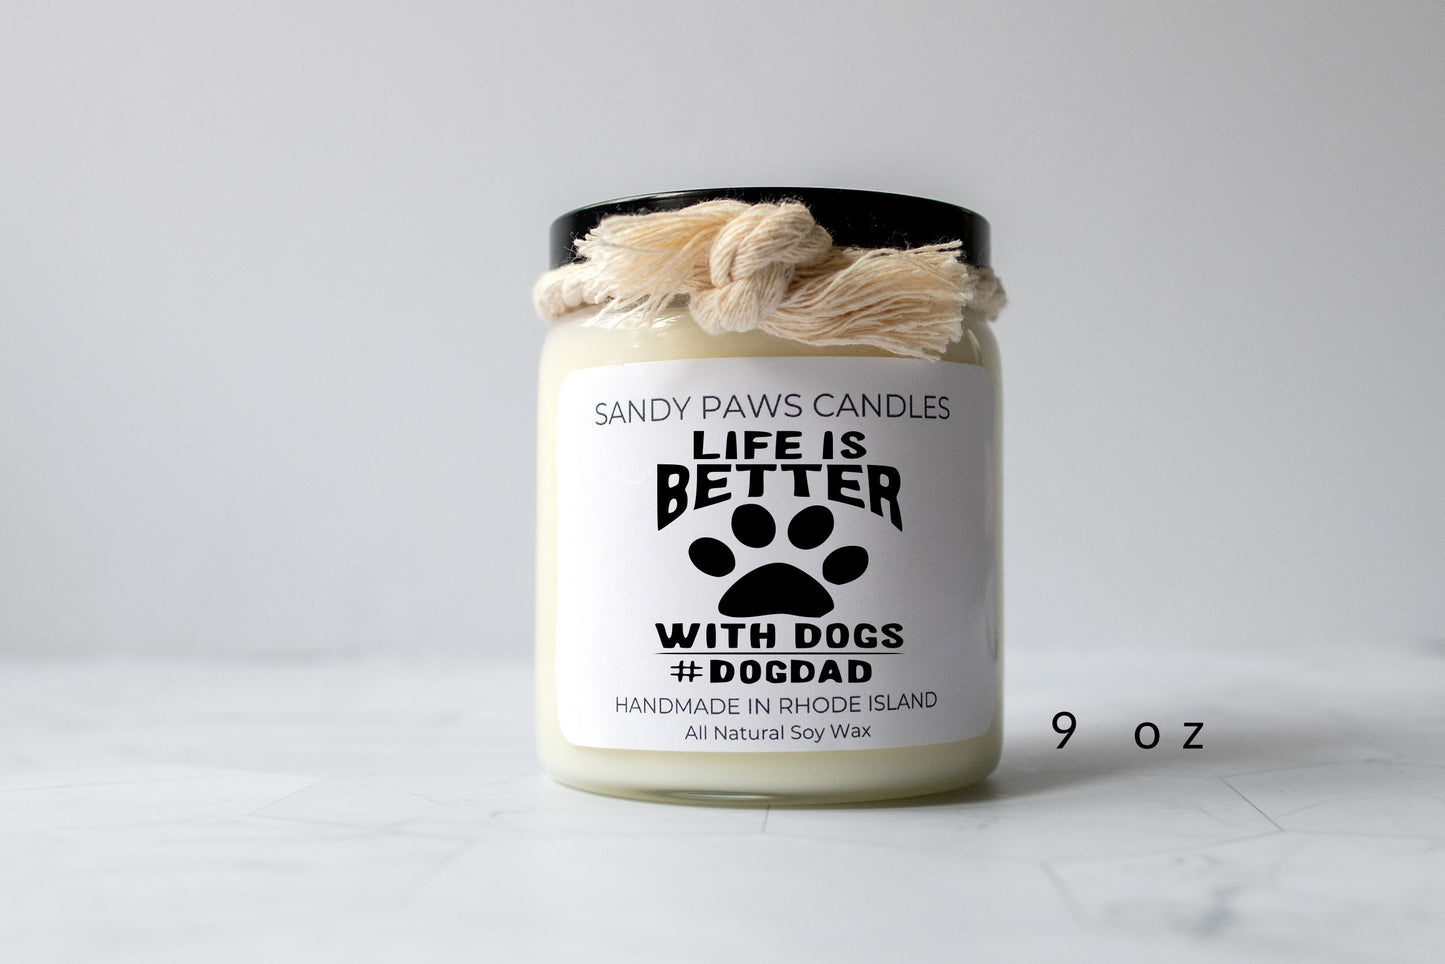 Dog Dad Soy Wax Candle - "Life is better with dogs #DOGDAD"